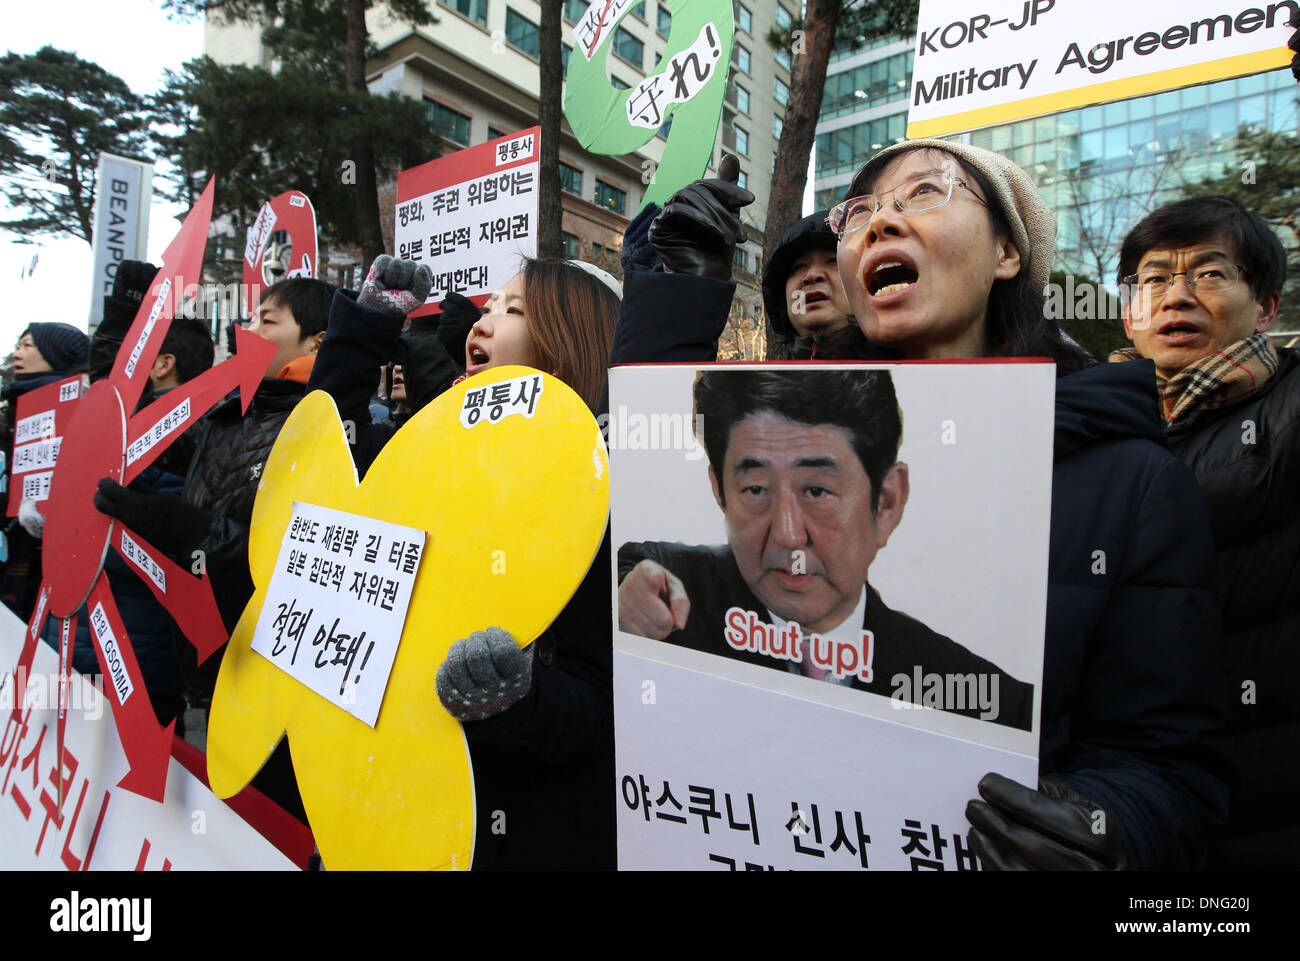 Seoul, South Korea. Dec. 27, 2013.  South Korean protesters participate in an anti-Japan rally in front of the residence of Japanese embassador in Seoul, South Korea, Dec. 27, 2013. The South Korean government on Thursday officially denounced Japanese Prime Minister Shinzo Abe's visit to the Yasukuni Shrine, Yonhap news agency reported.  Credit:  Park Jin-hee/Xinhua/Alamy Live News Stock Photo